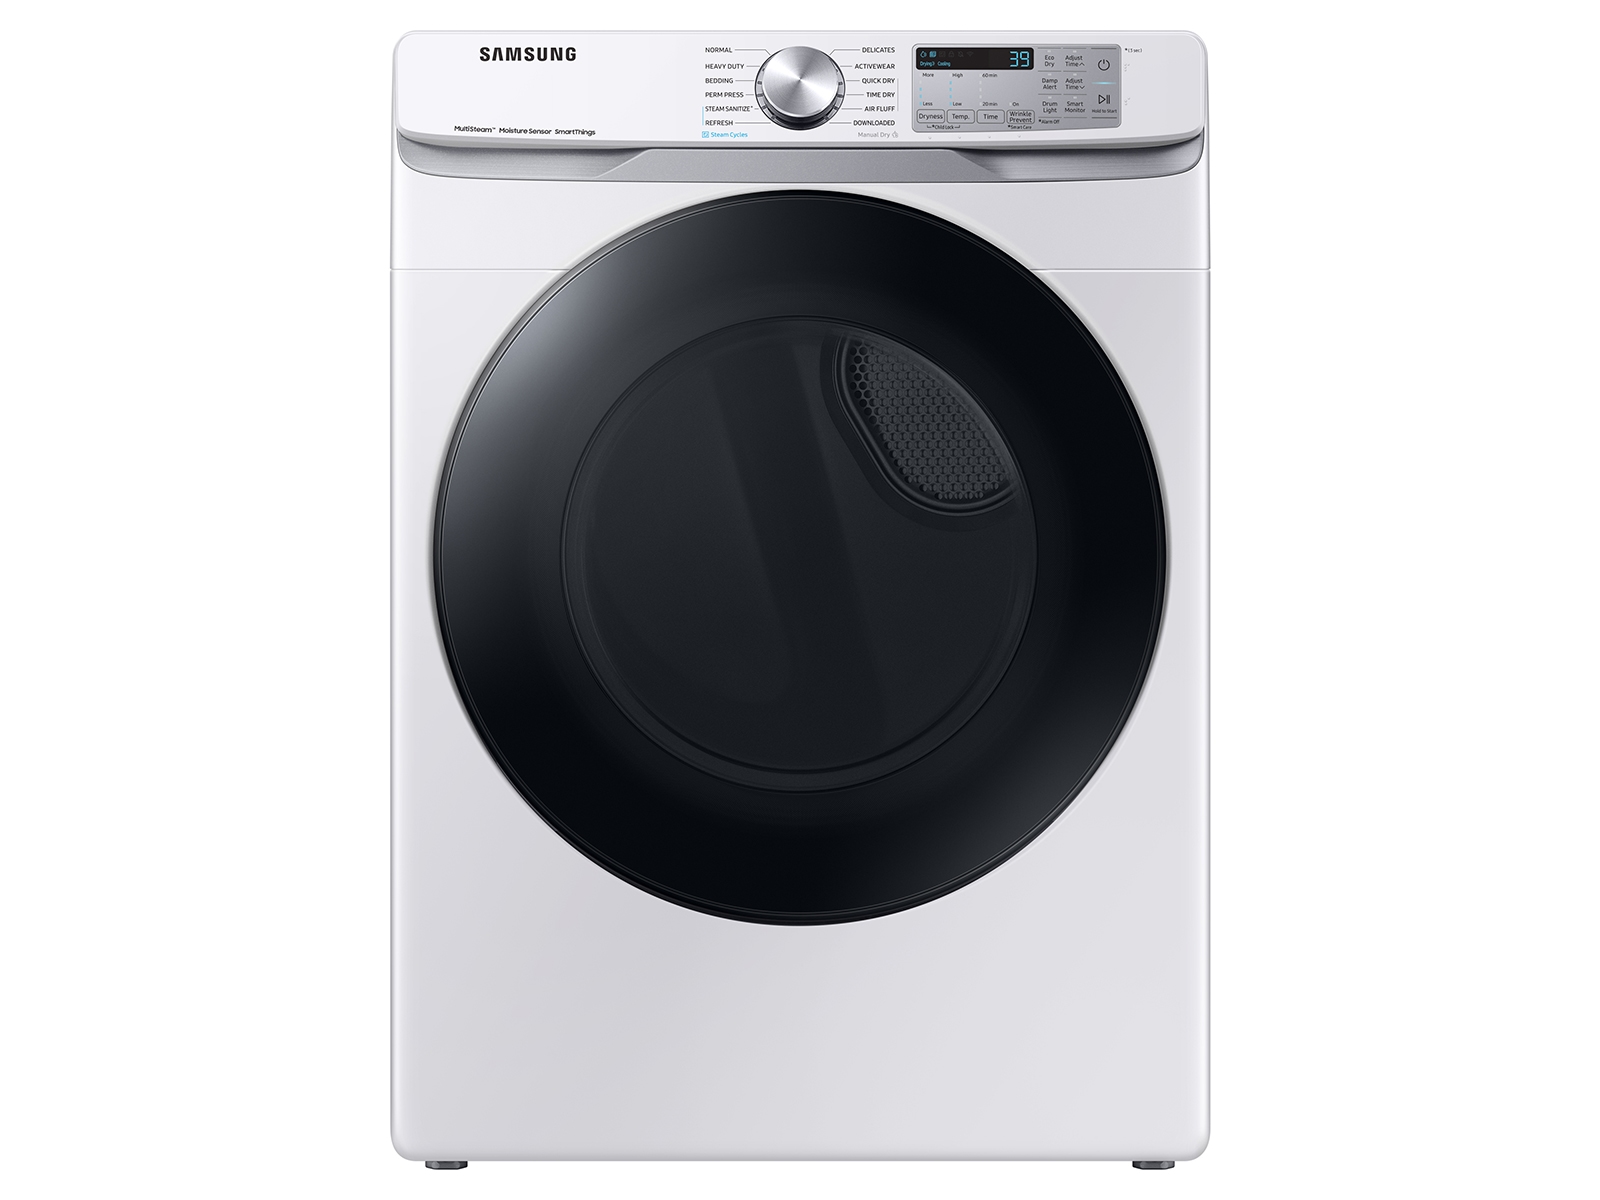 Samsung 7.5 cu. ft. Smart Electric Dryer with Steam Sanitize+ in White(DVE45B6300W/A3)